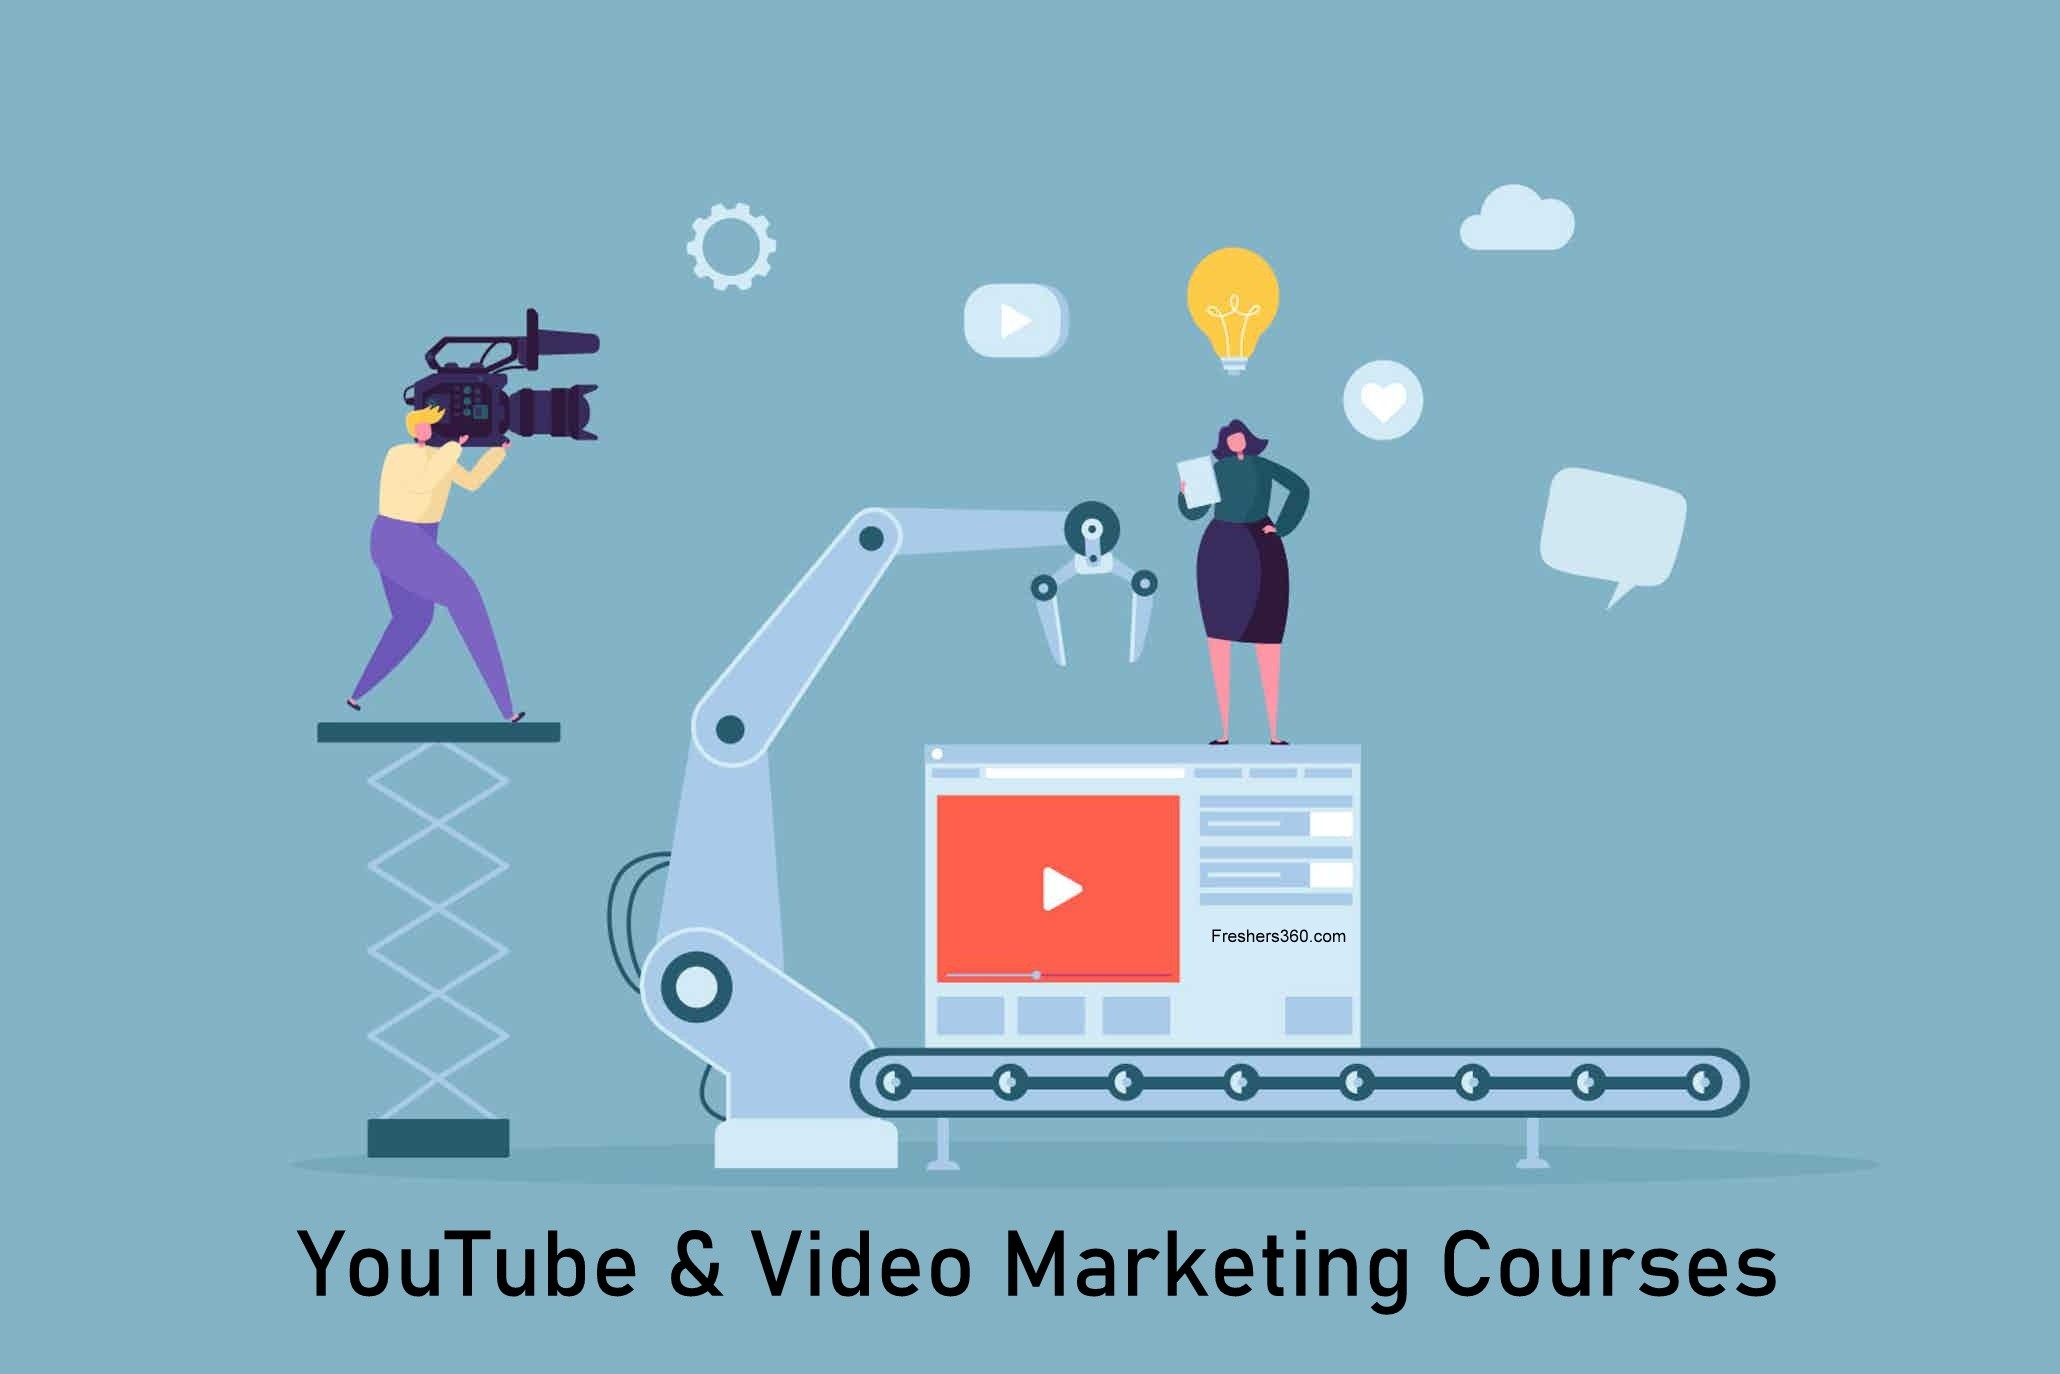 Free YouTube & Video Marketing Courses